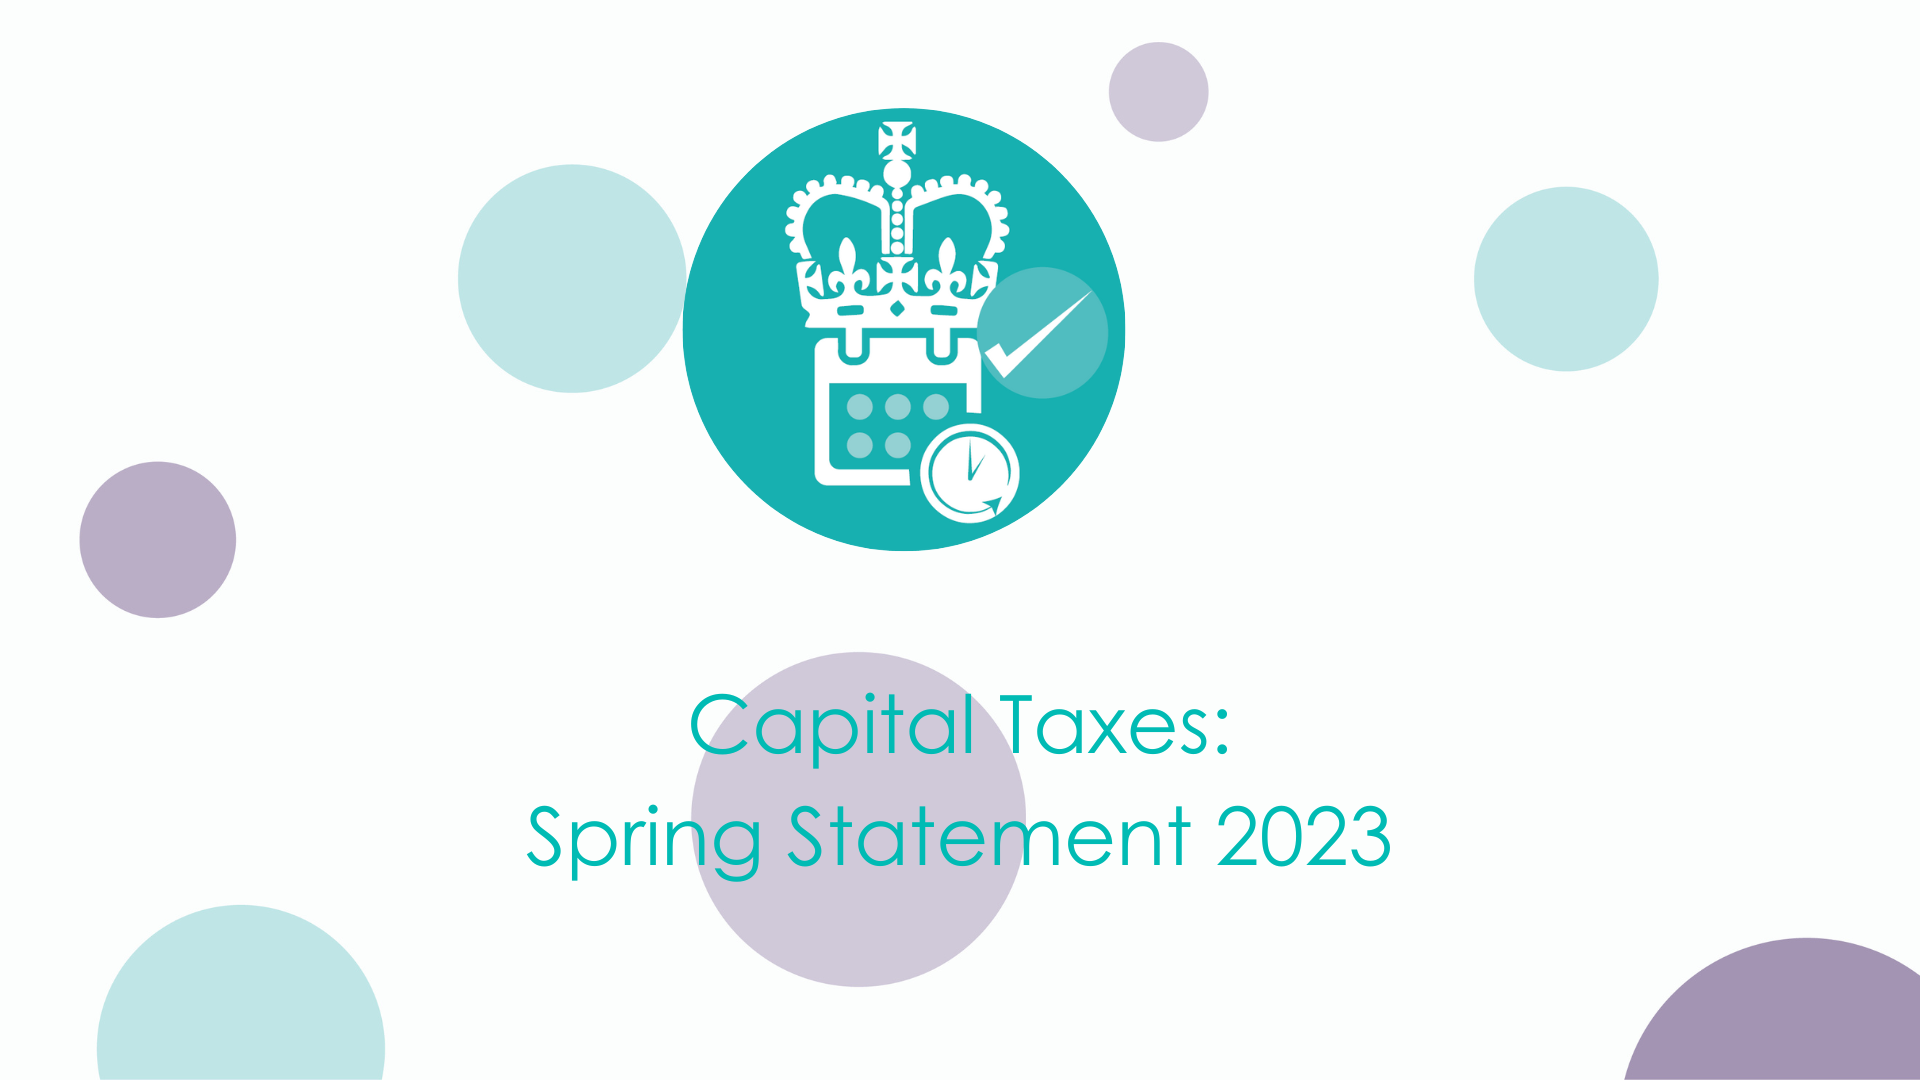 Spring Statement 2023: Capital Taxes